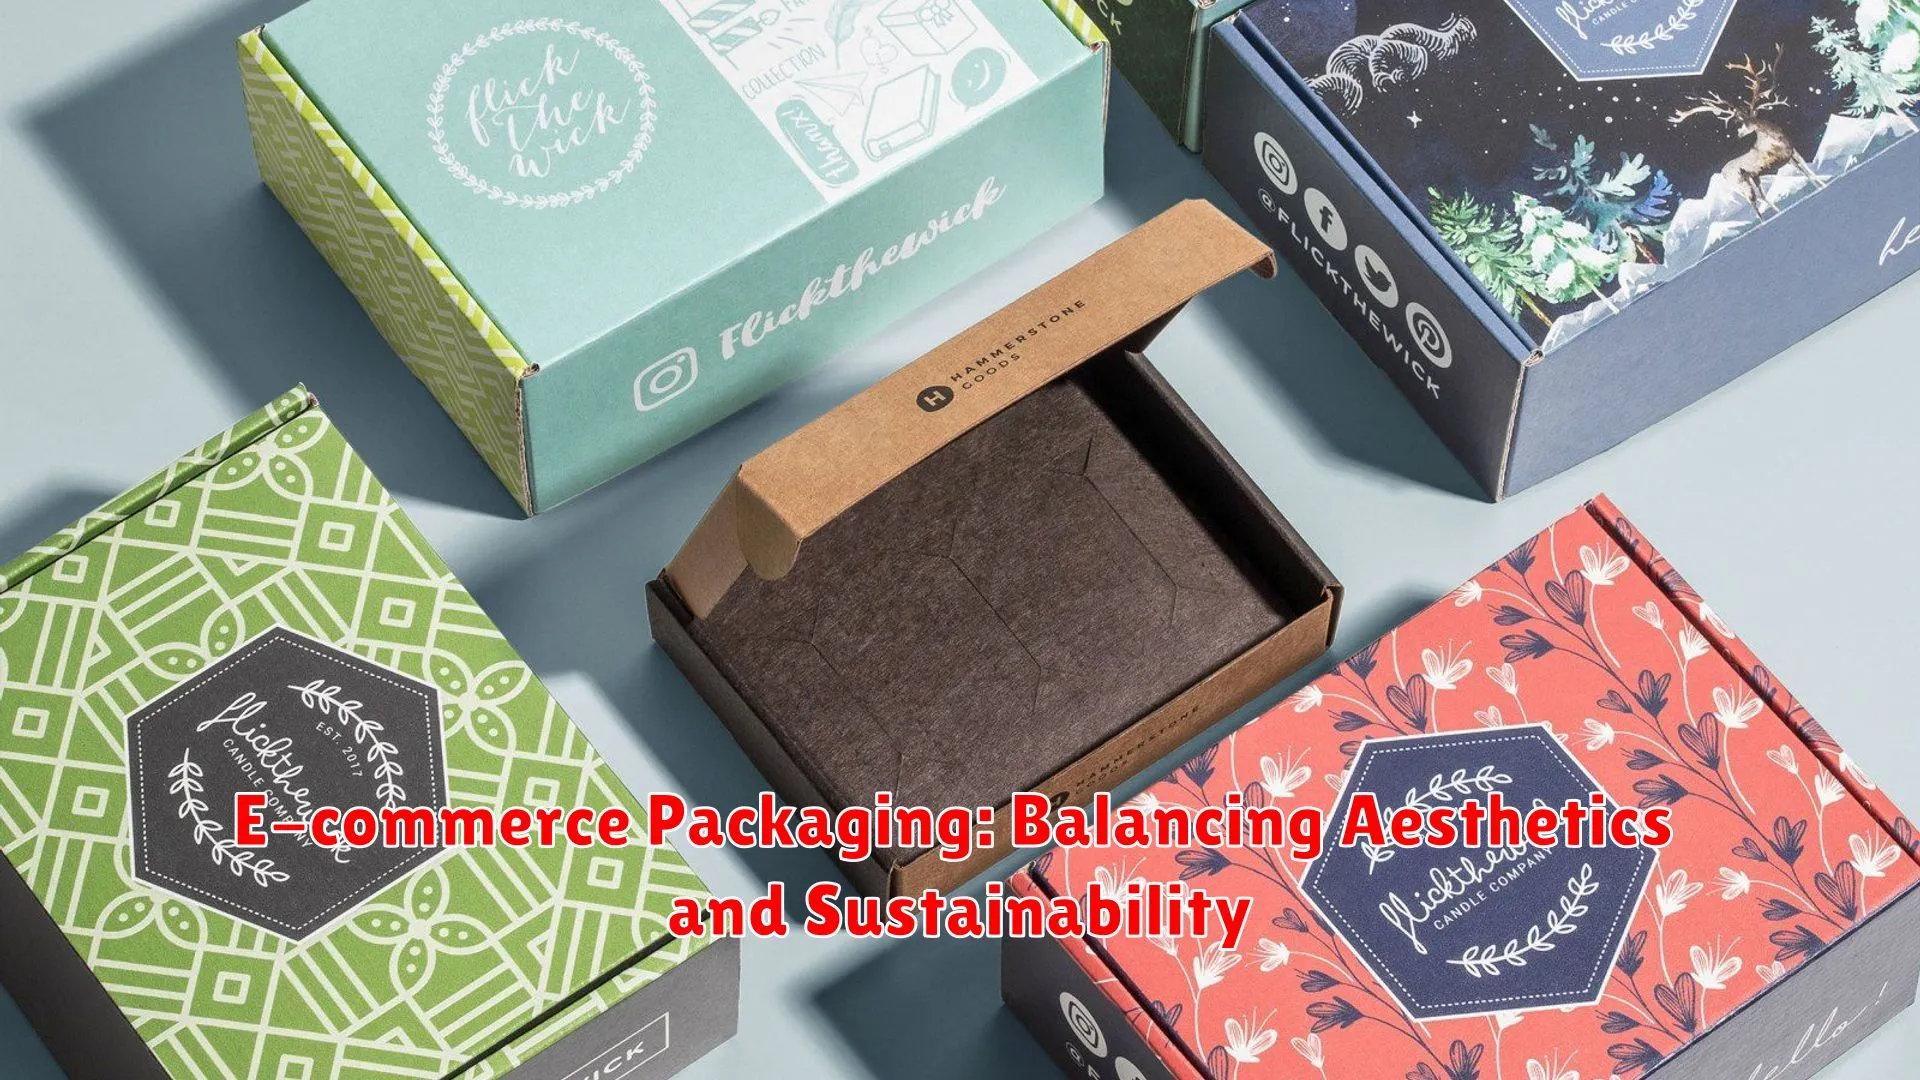 E-commerce Packaging: Balancing Aesthetics and Sustainability